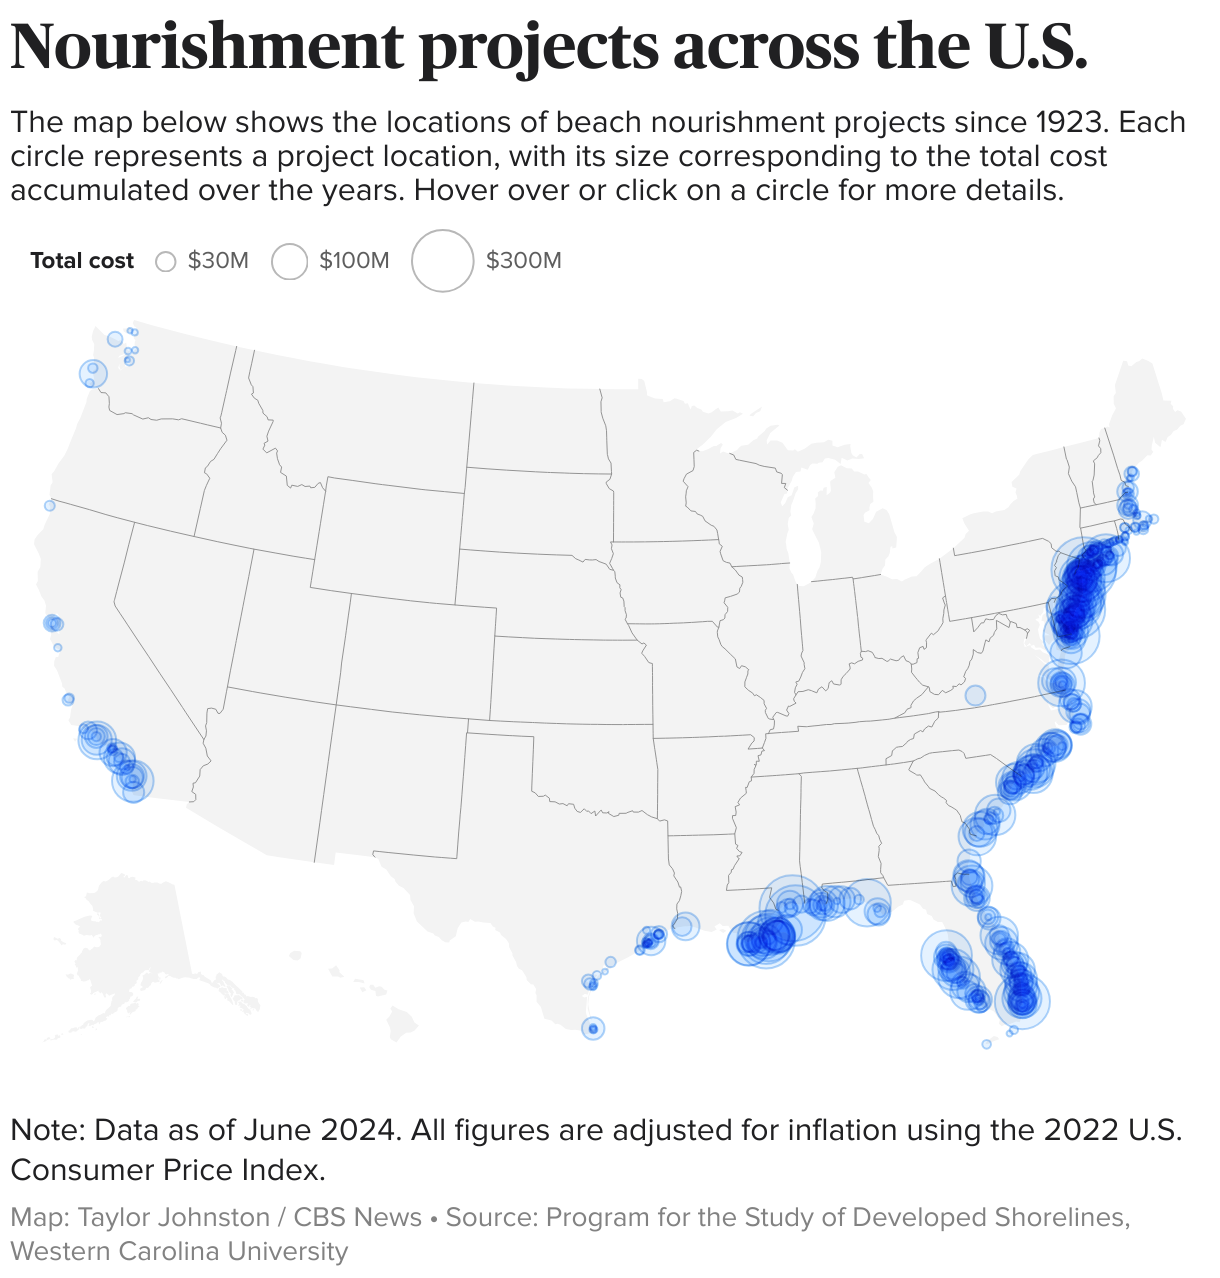 Map showing total project costs of beach nourishment projects across the U.S.